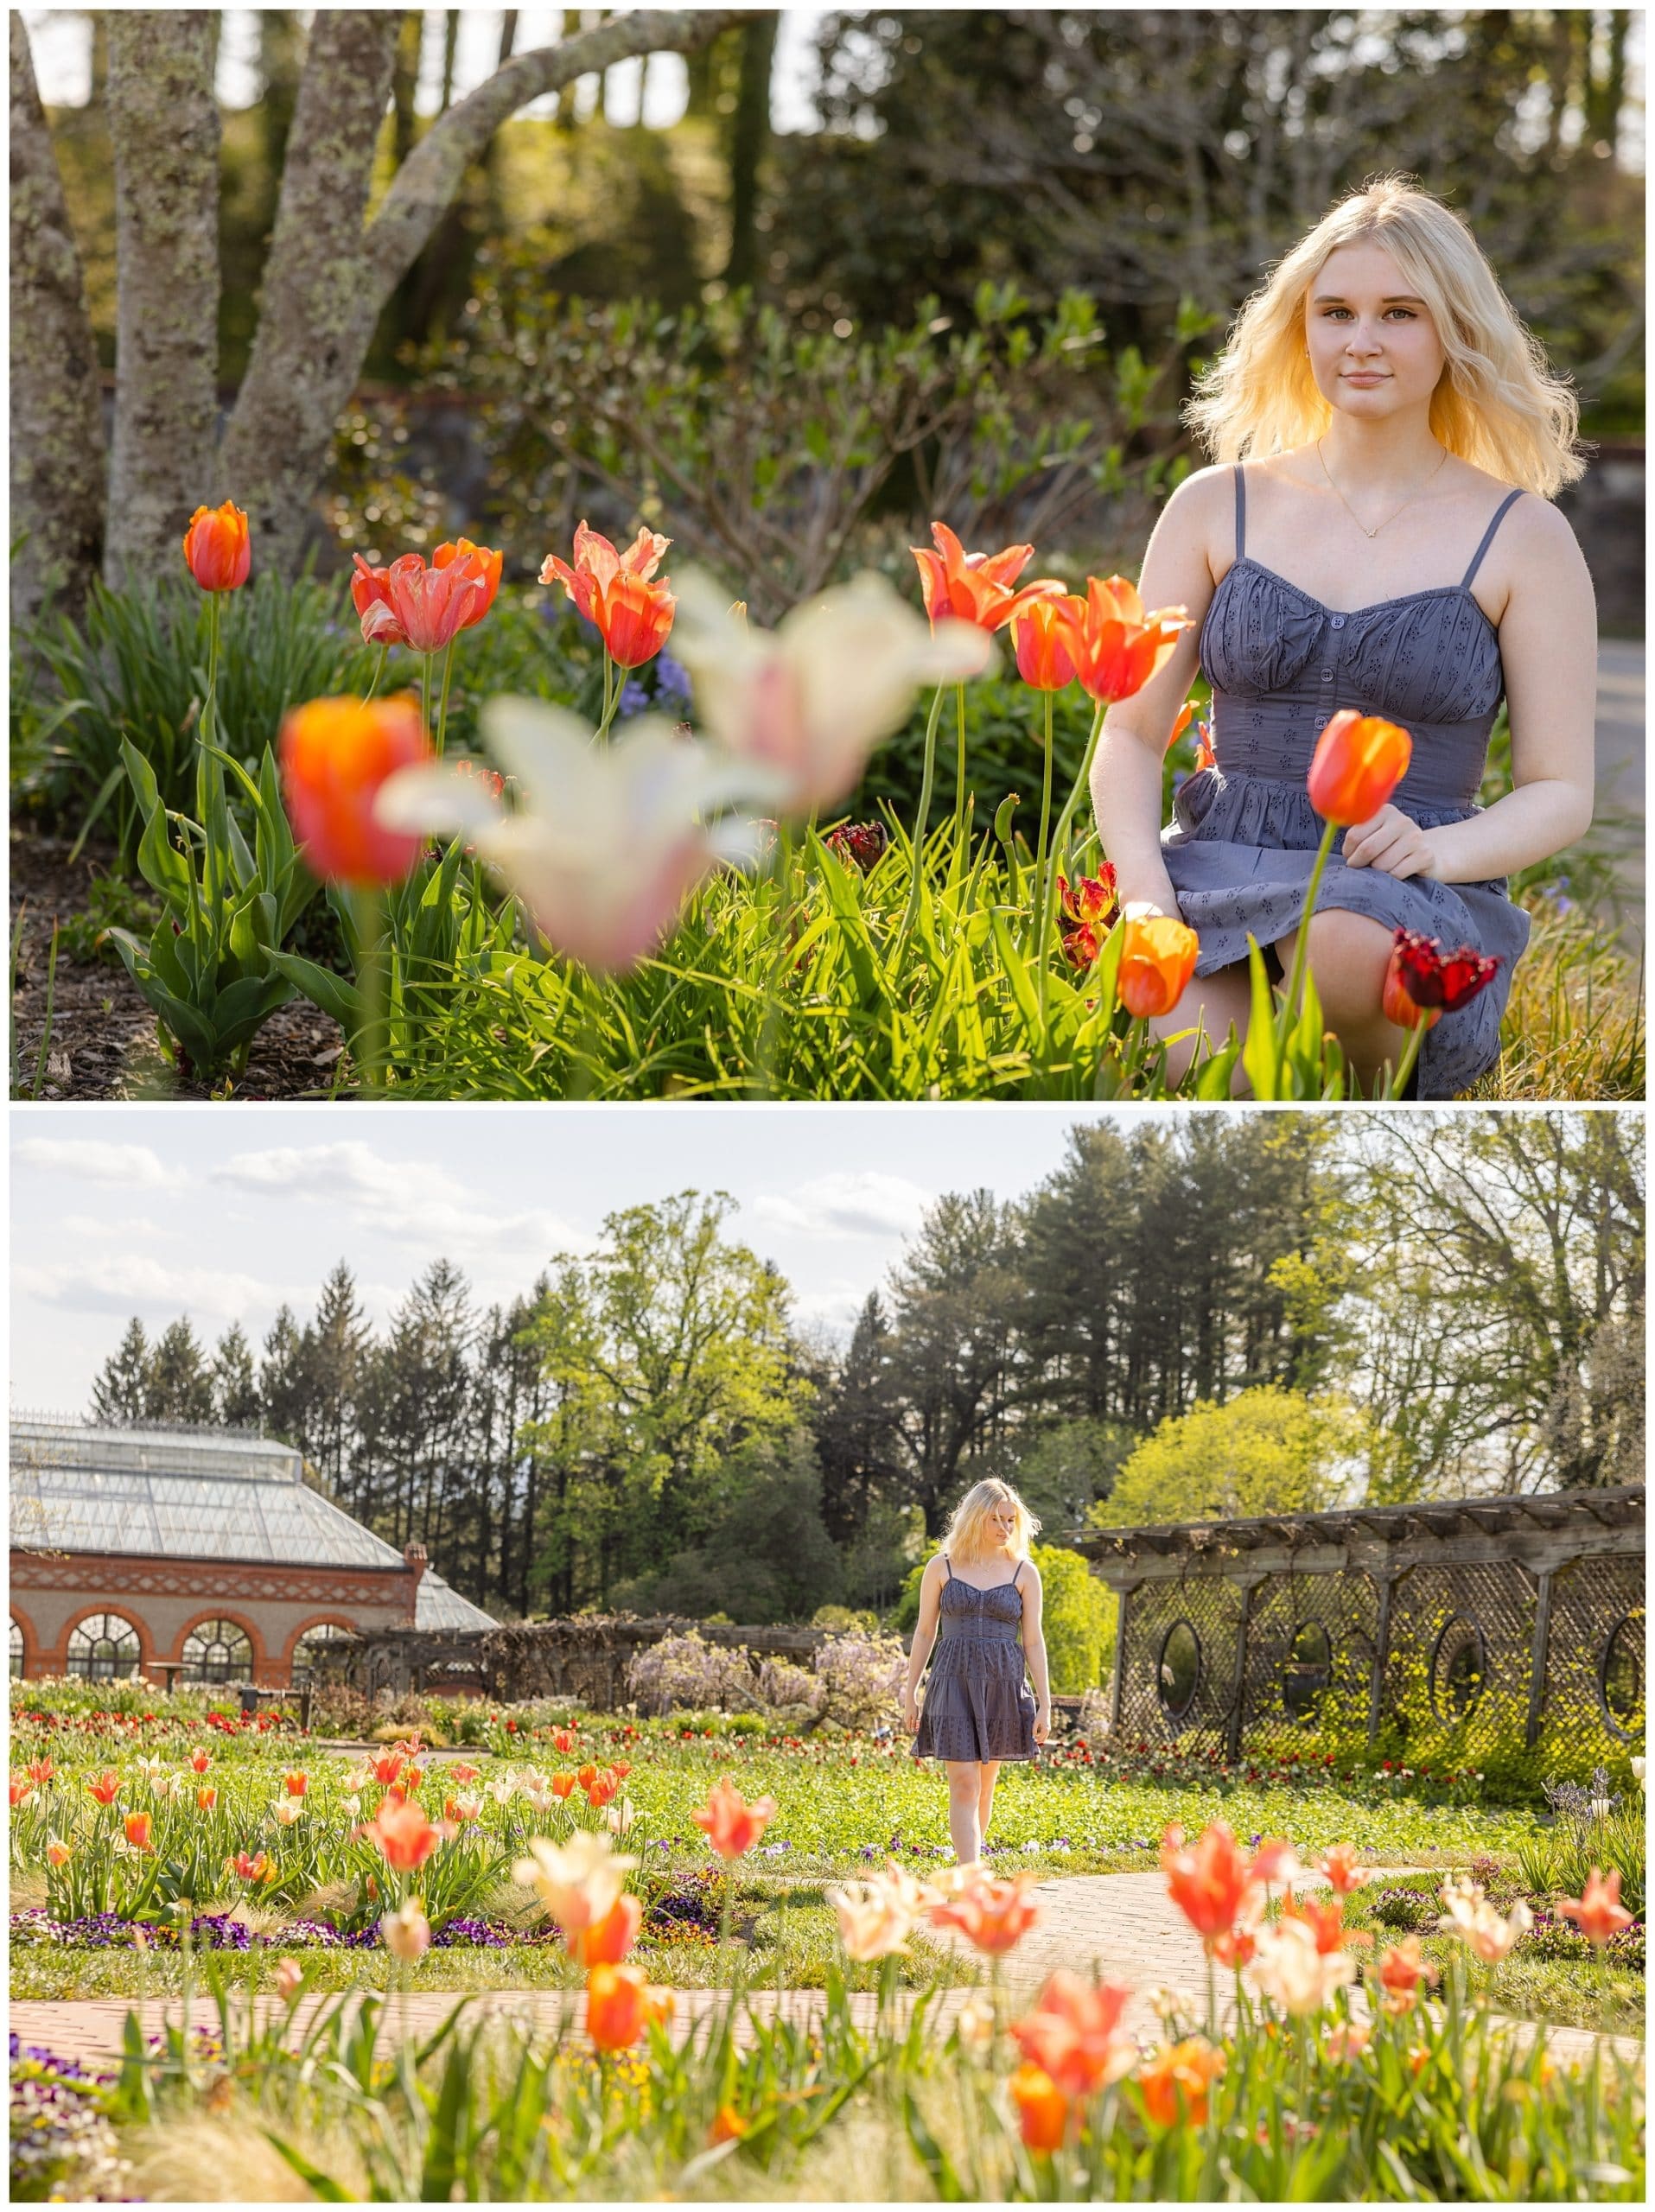 Senior pictures in the gardens at the Biltmore. Photos by Kathy Beaver Photography, an Asheville Senior Photographer.